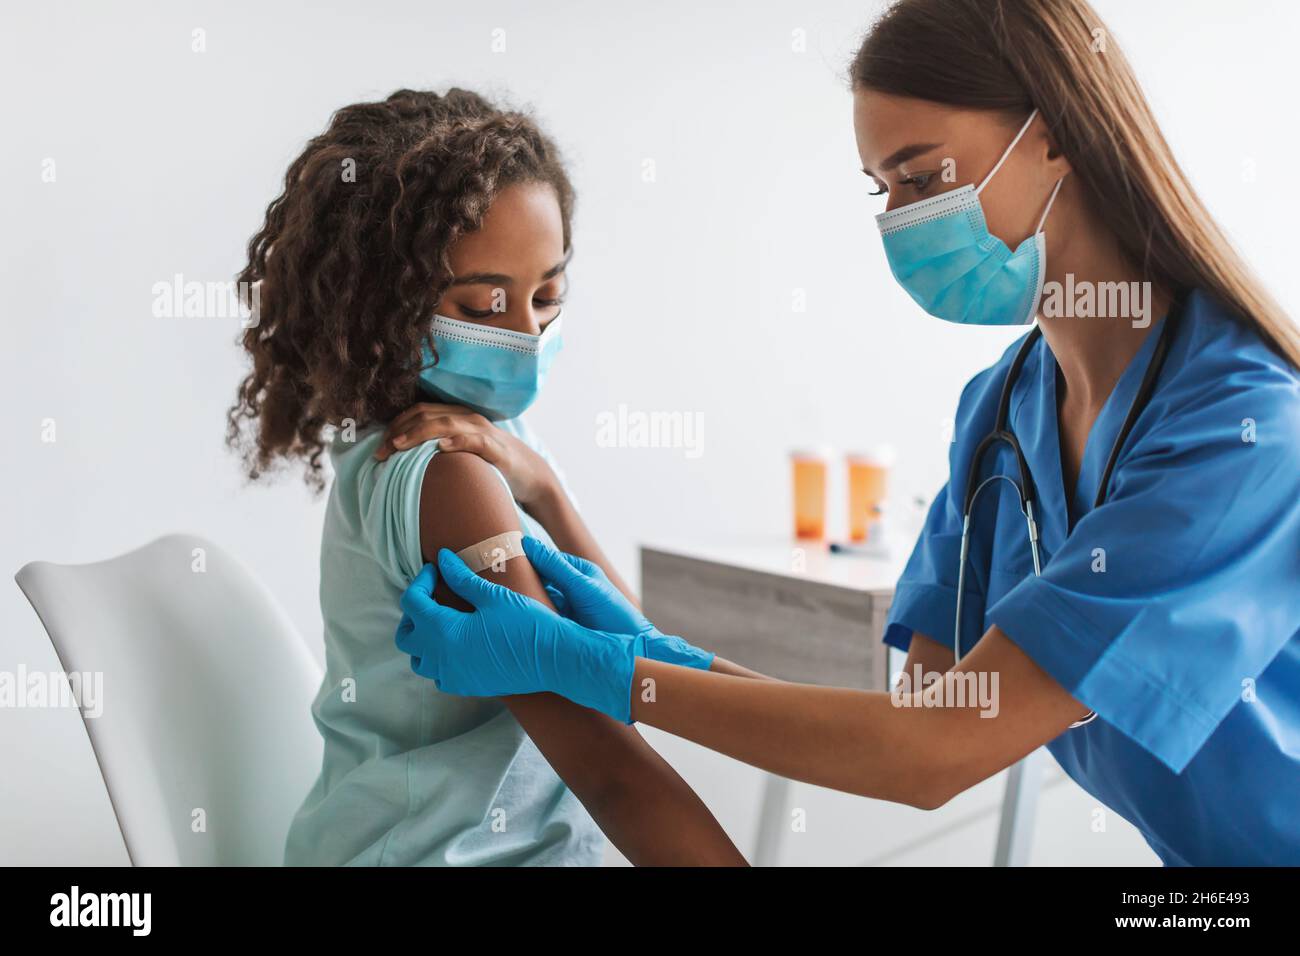 Medical Worker Vaccinating Black Pre-Adolescent Girl Making Vaccination In Clinic Stock Photo